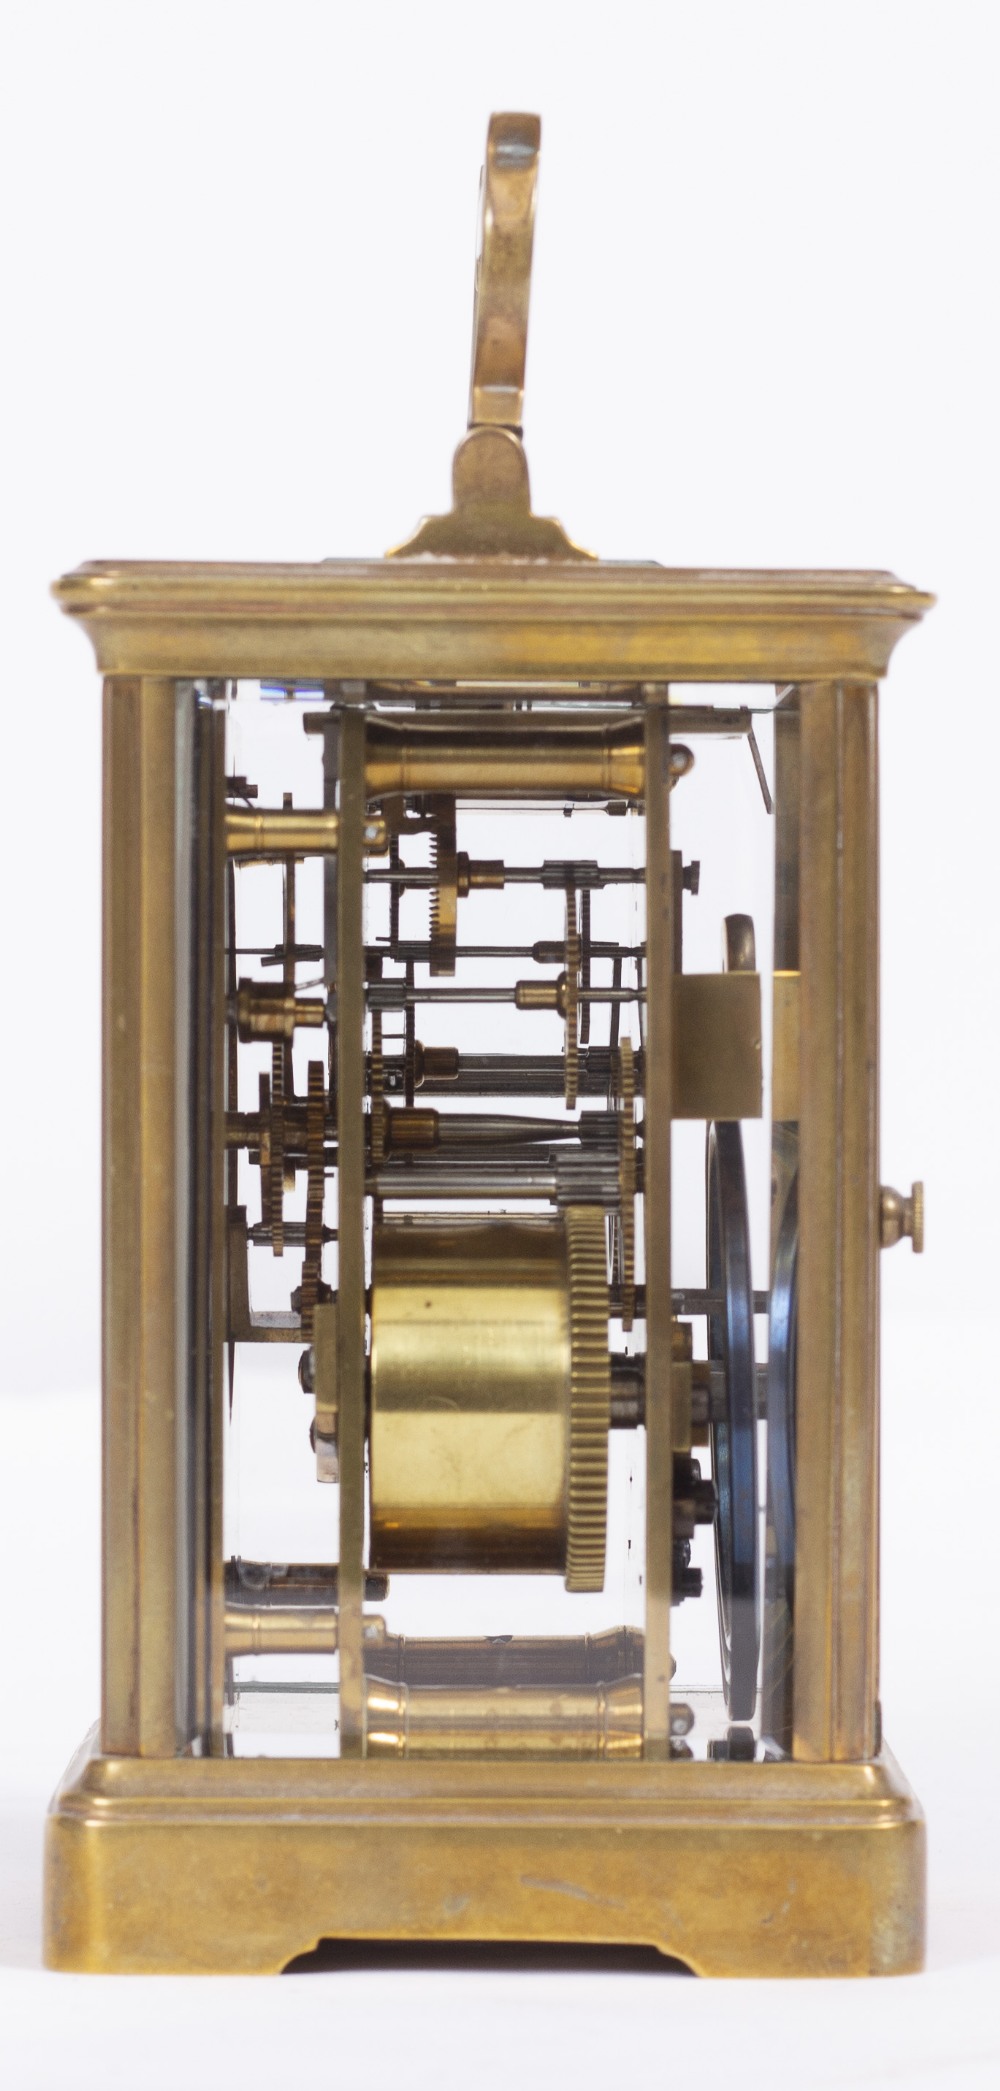 A BRASS CARRIAGE CLOCK, with enamel dial, striking the hours and half hours in a gong, 17cm high - Image 2 of 5